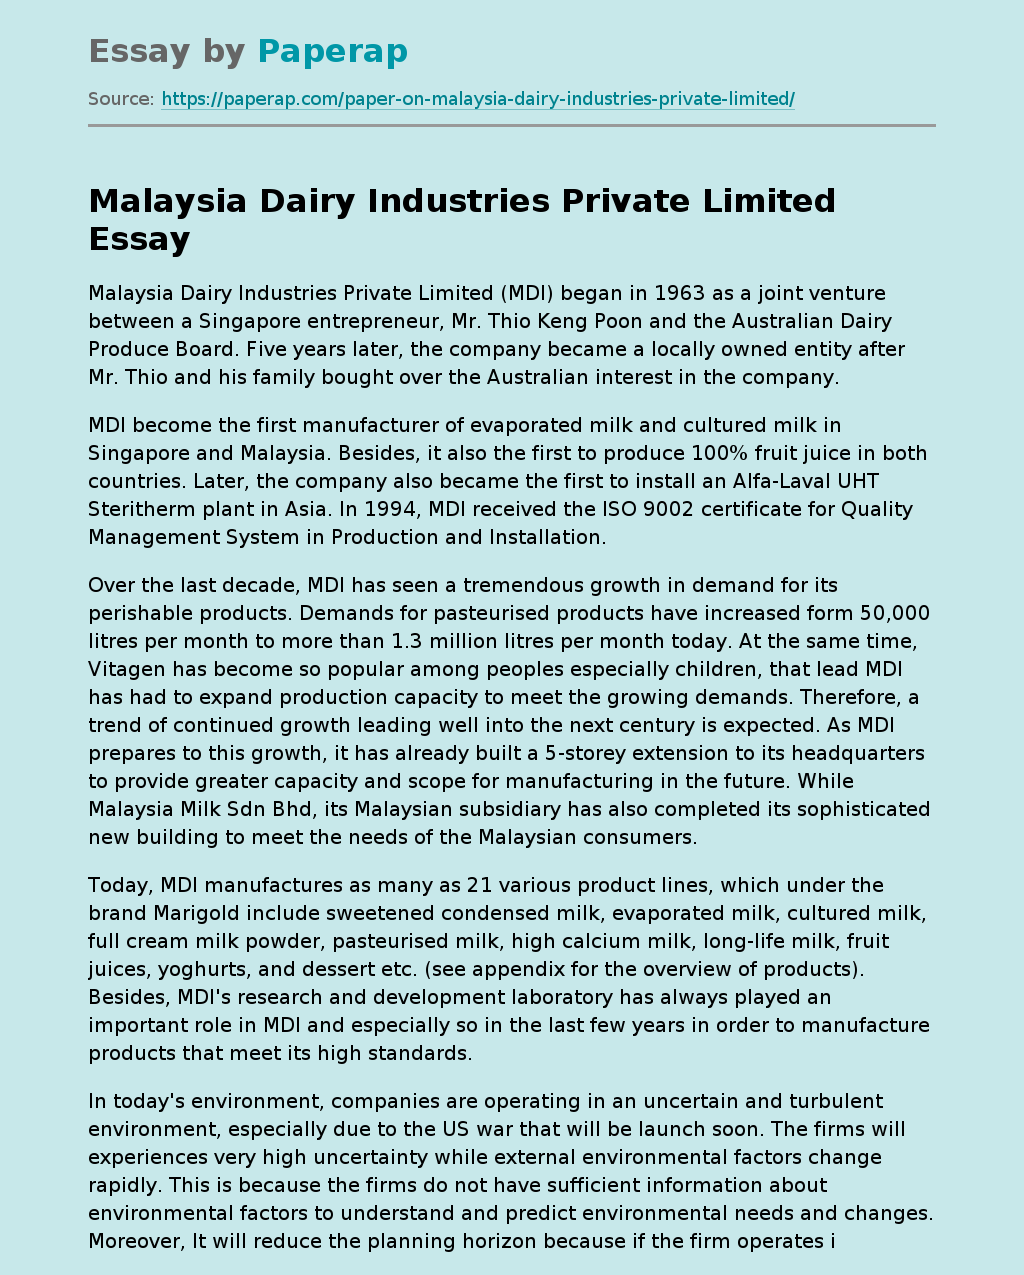 Malaysia Dairy Industries Private Limited